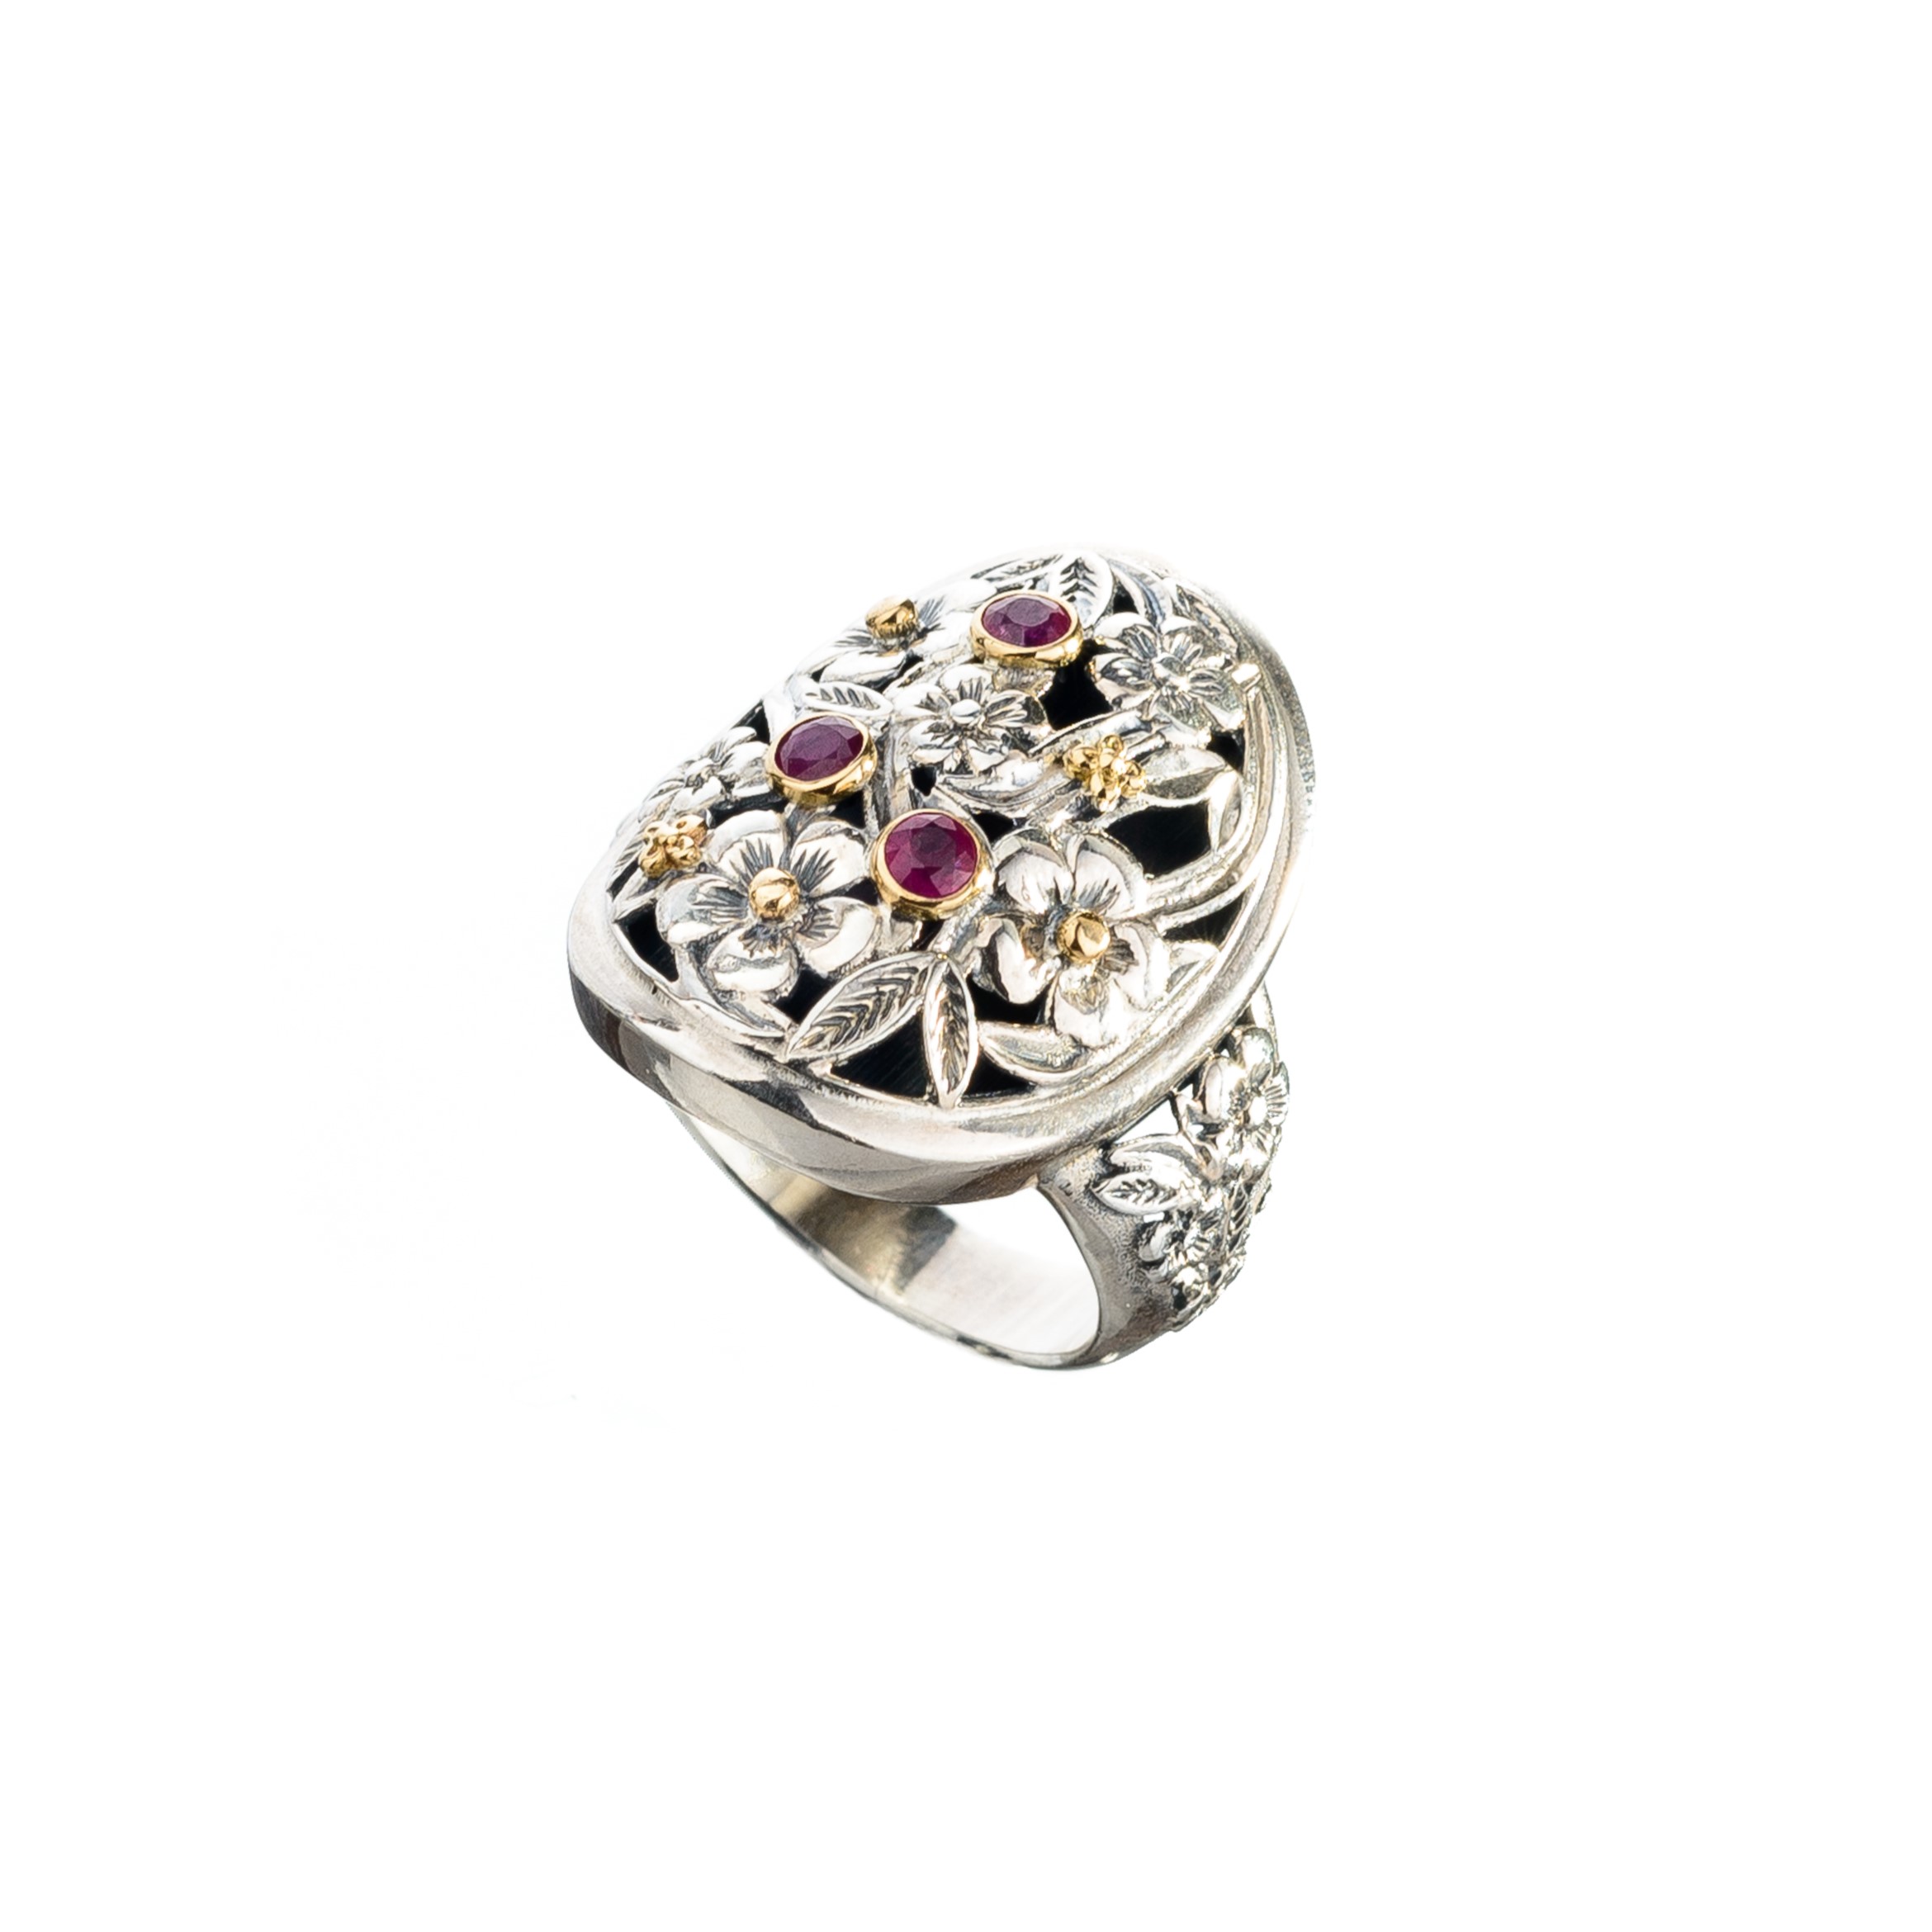 Harmony ring in 18K Gold and Sterling Silver with rubies